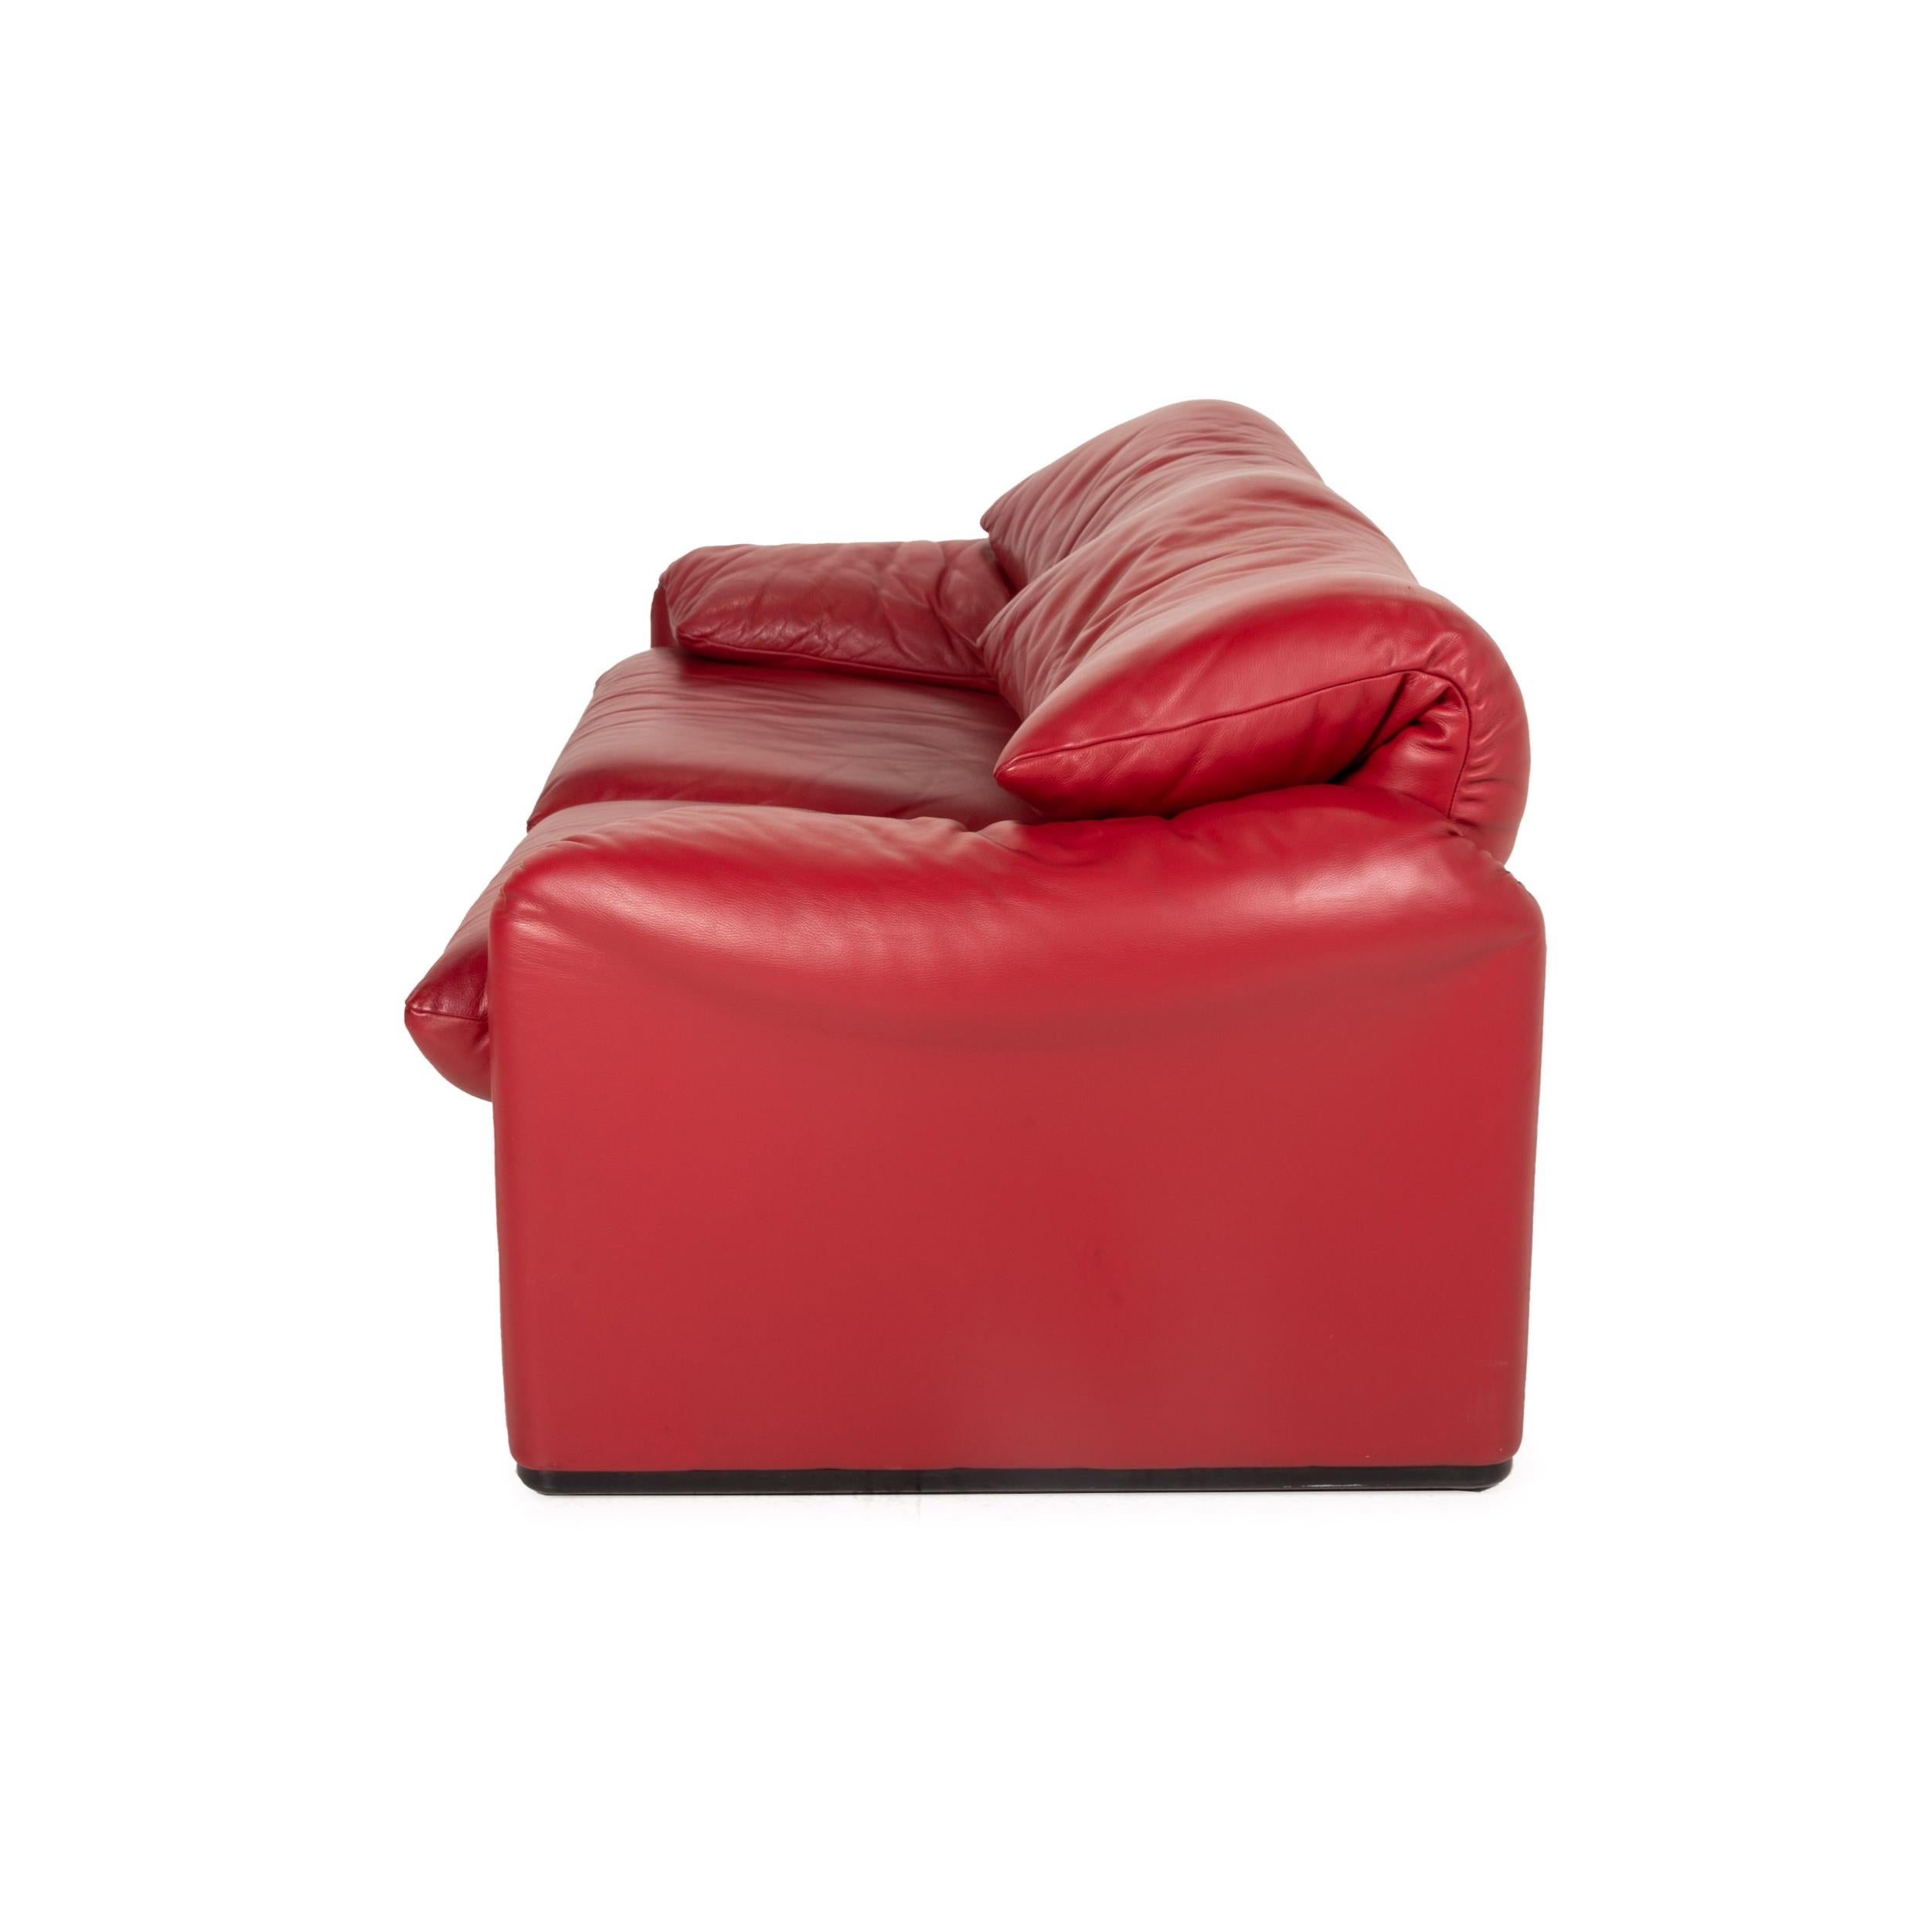 Cassina Maralunga Designer Leather Sofa Red Two-Seater Couch Function 3